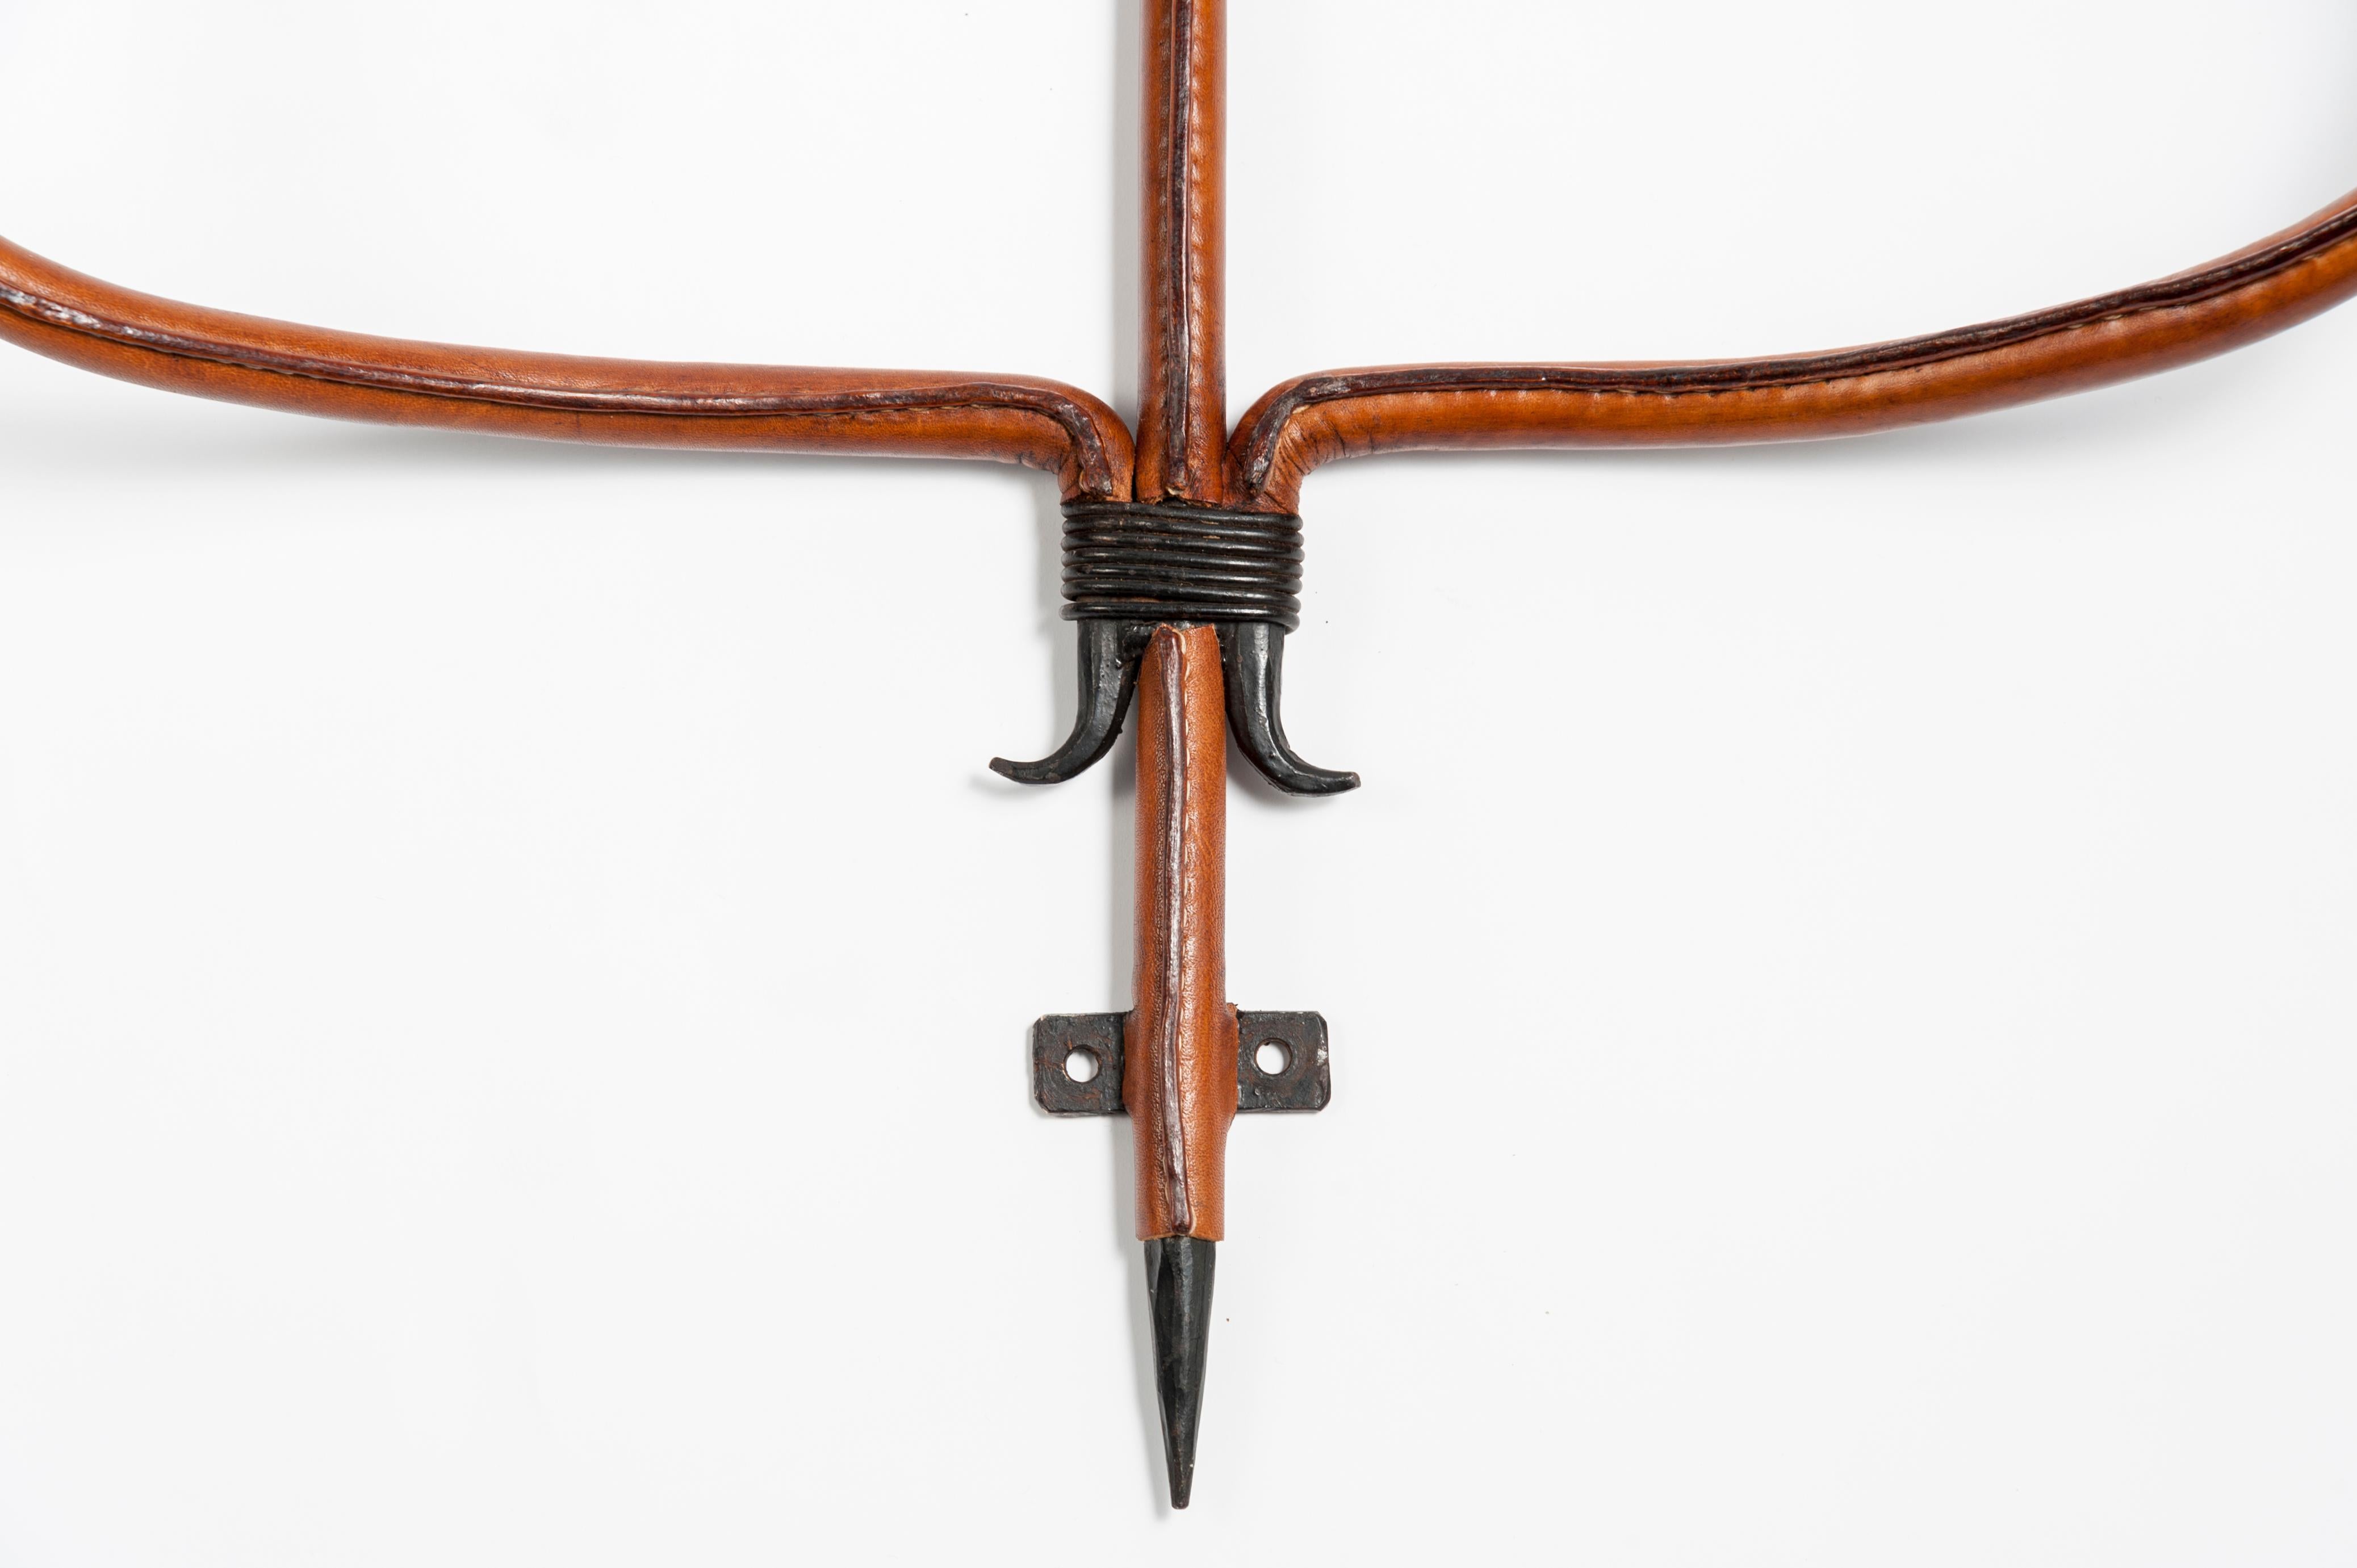 Very nice stitched leather coat rack by Jacques Adnet
Very unusual in this size.
 